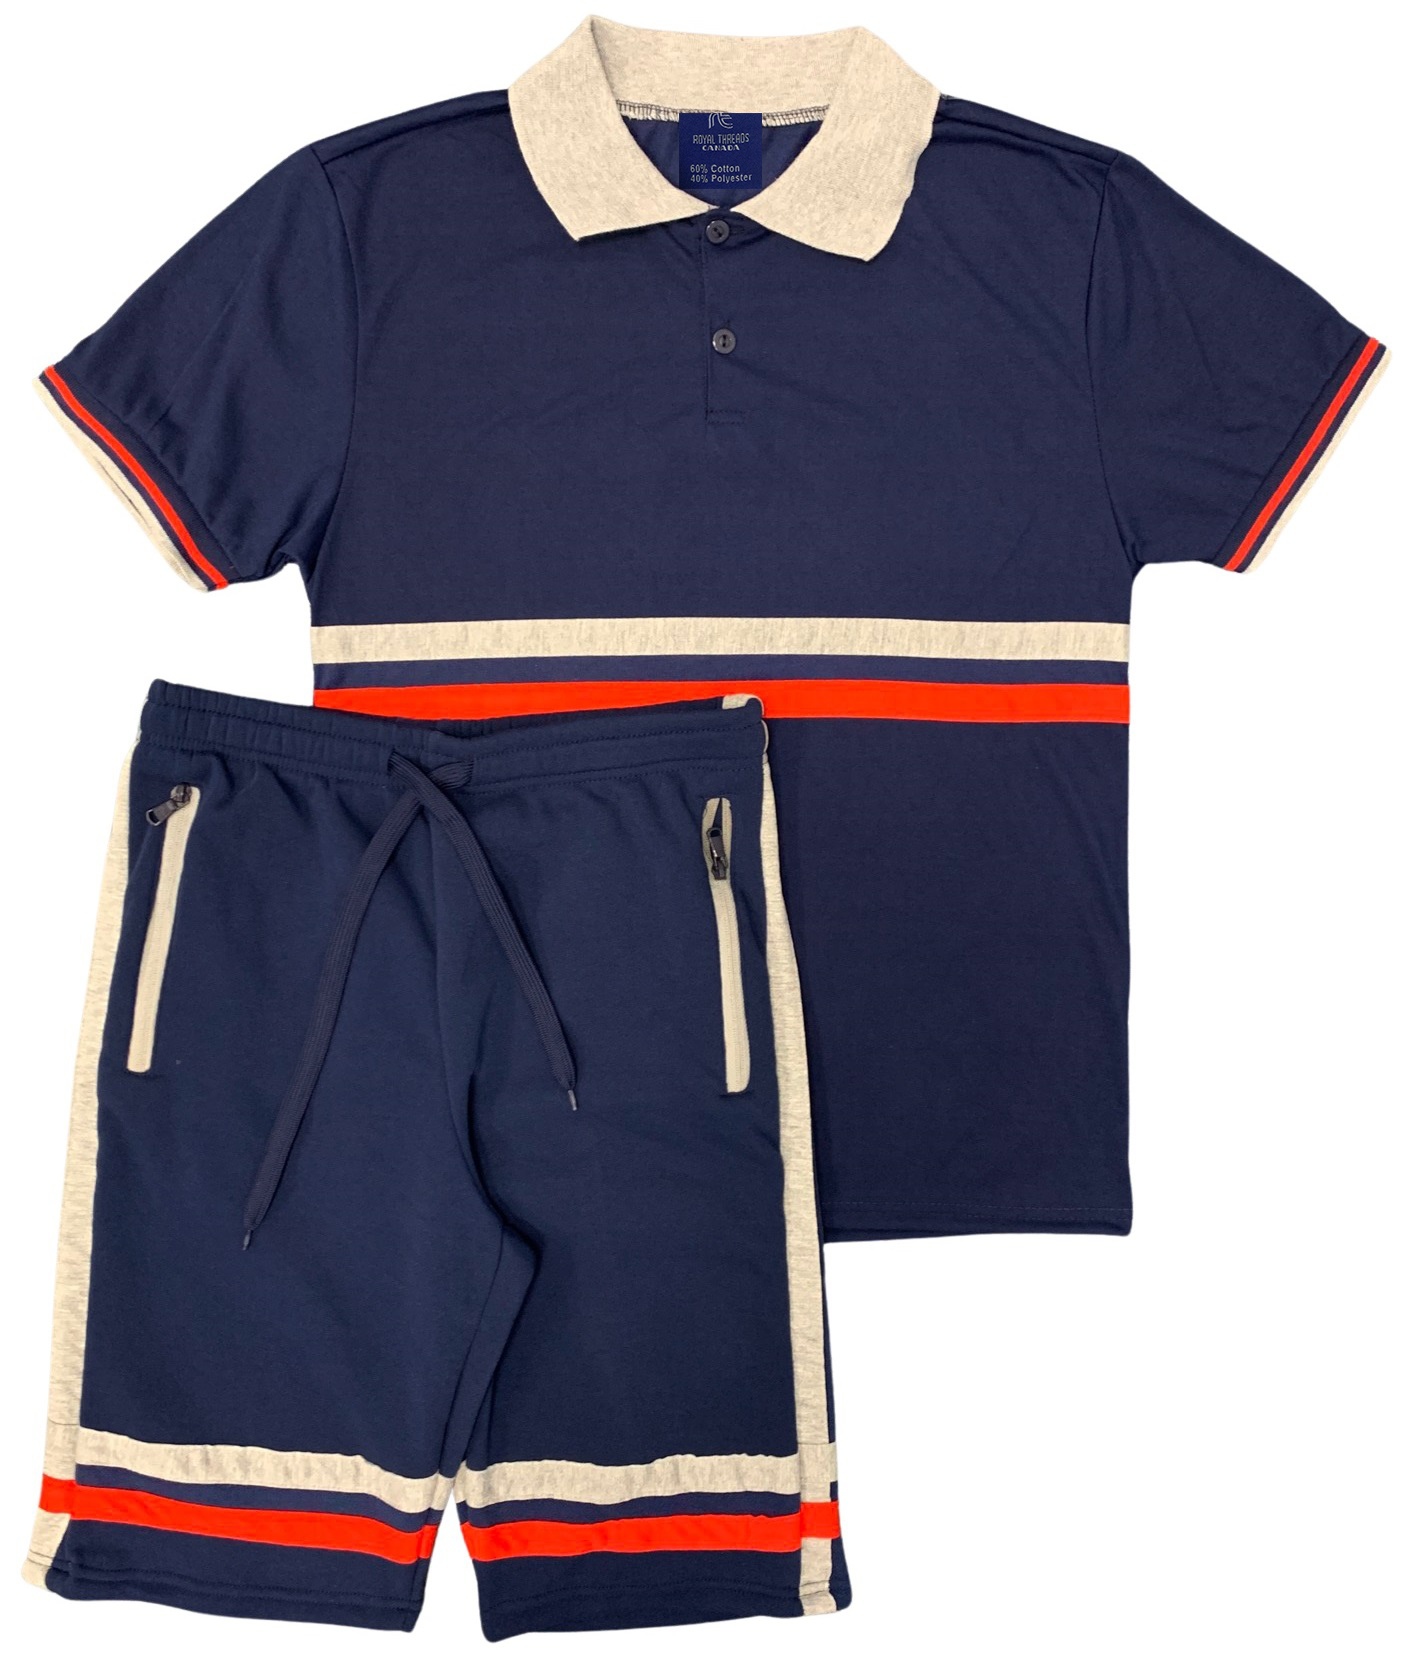 Royal Threads Canada Men’s 2-Piece Short Set with 2 bottom down Shirt and Soft Fleece Summer Shorts Matching Outfit